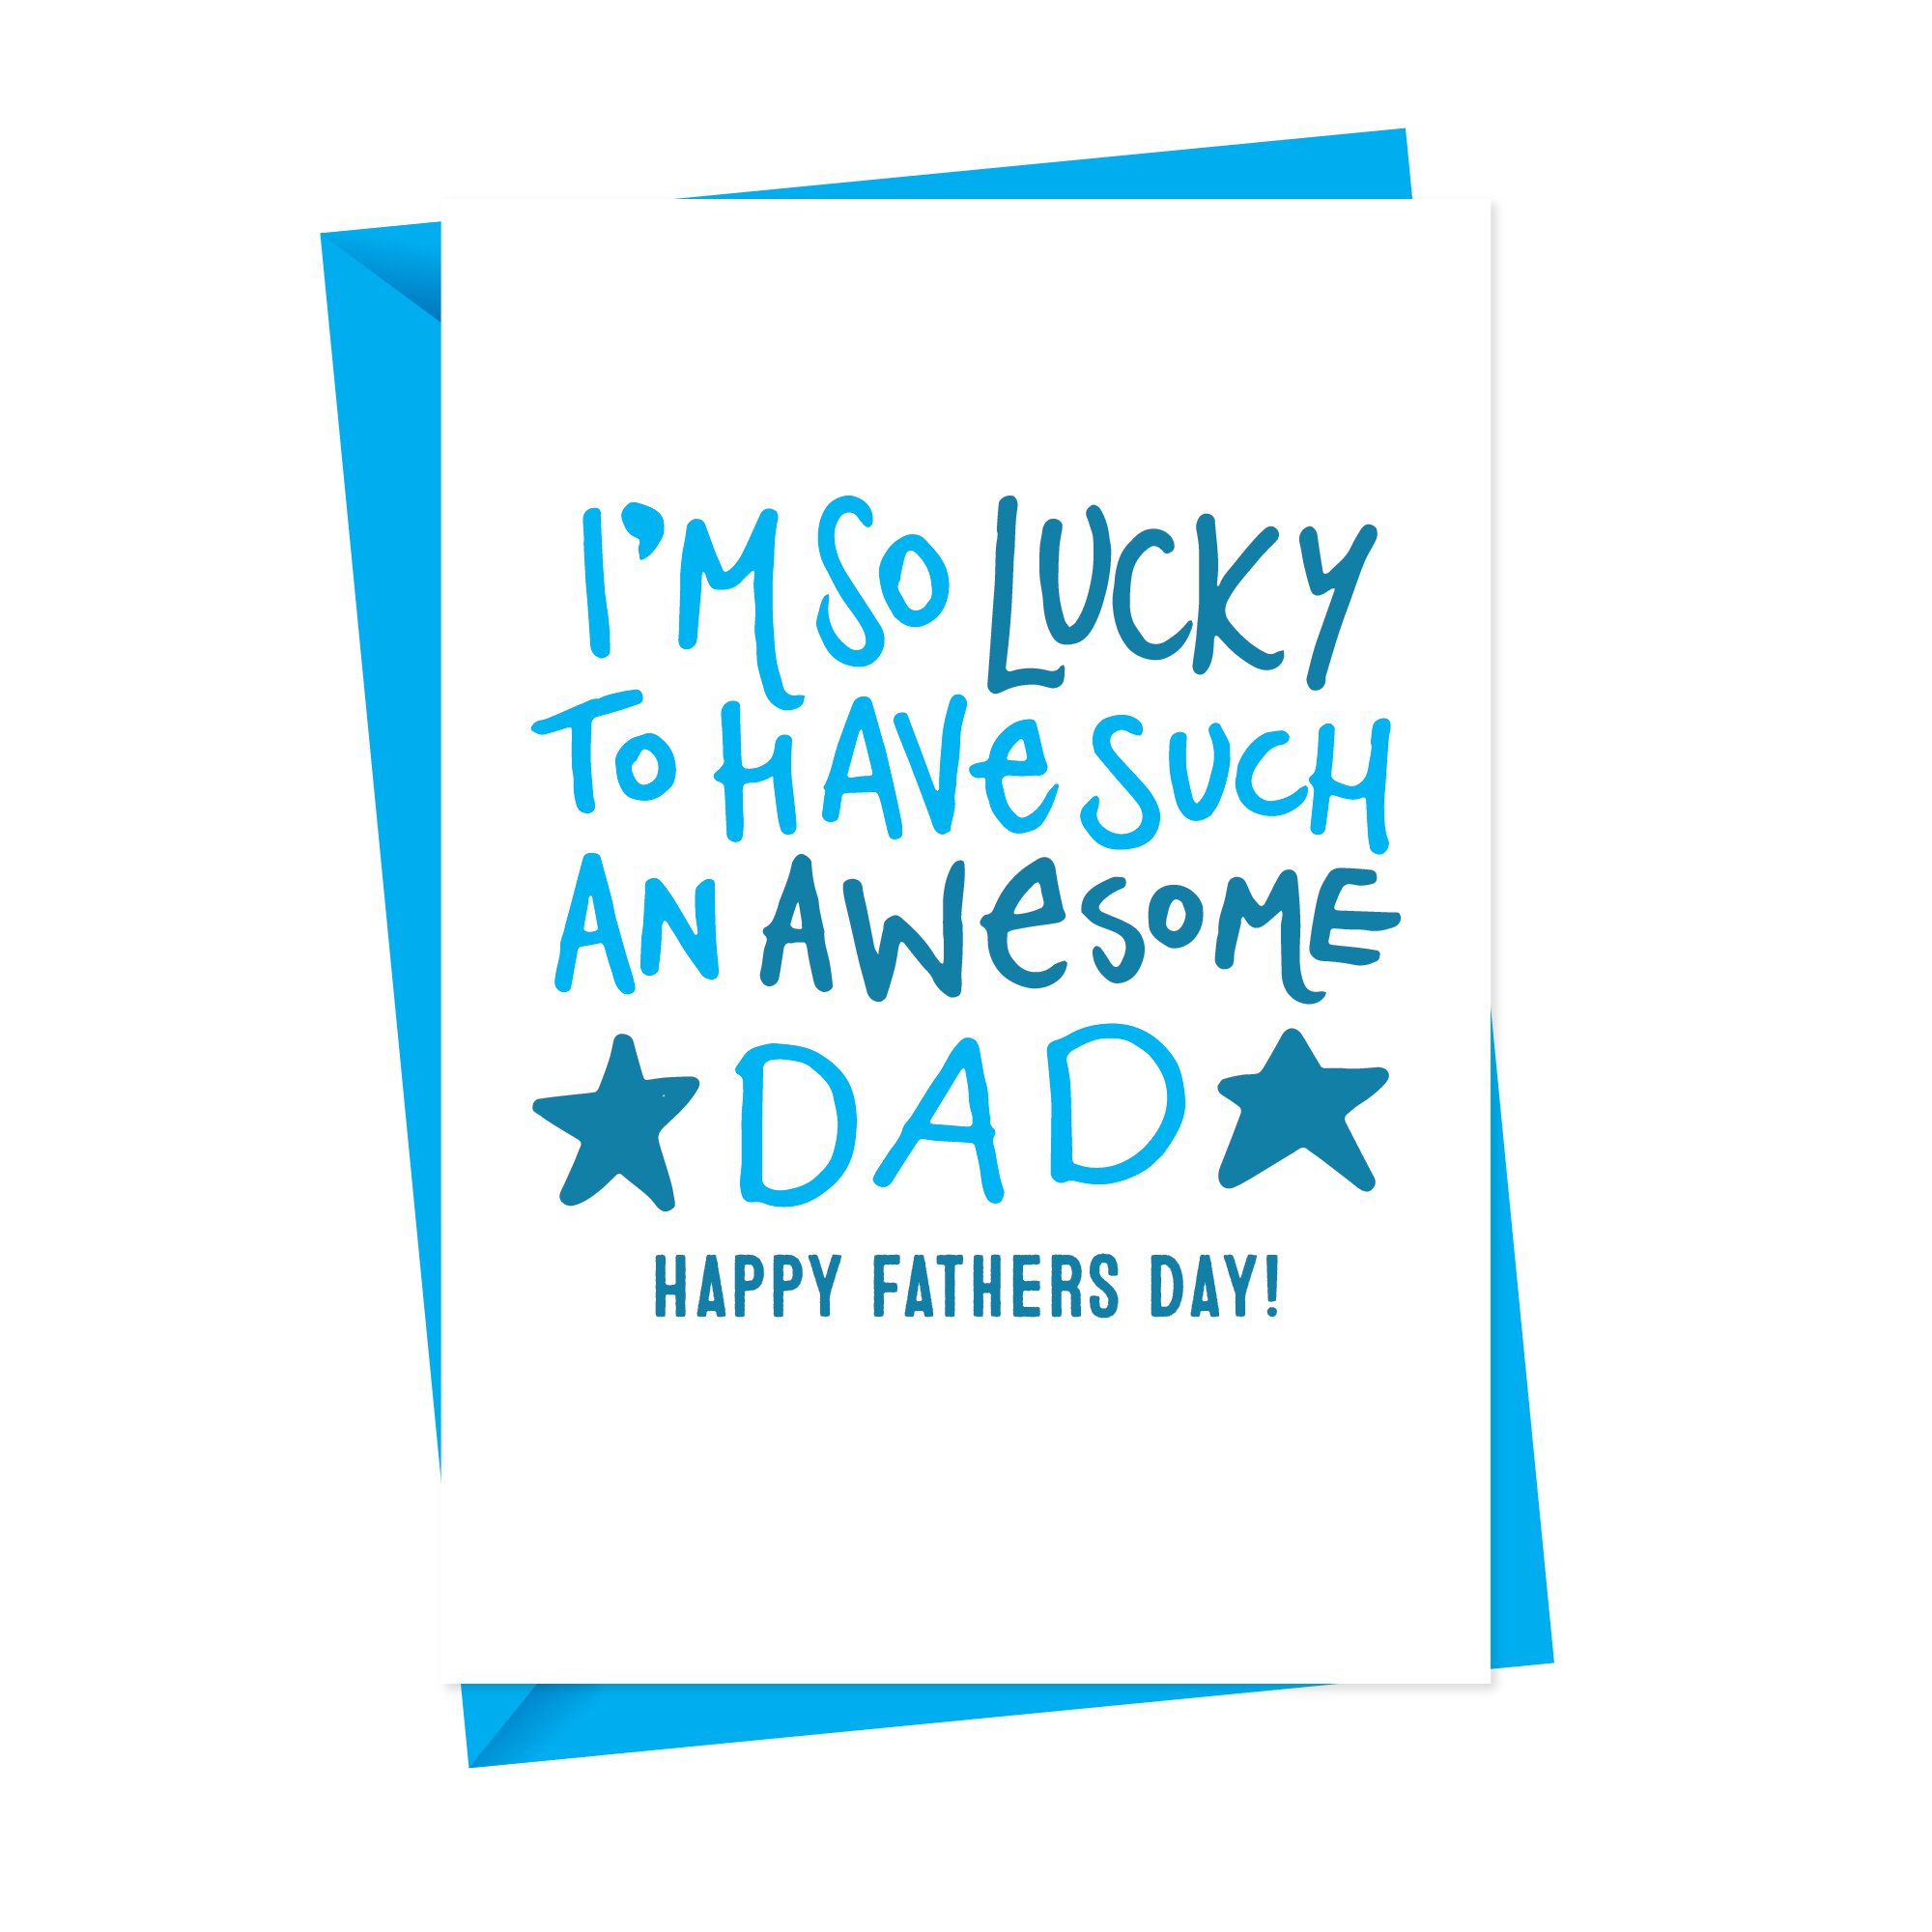 Awesome Day Fathers Day Card